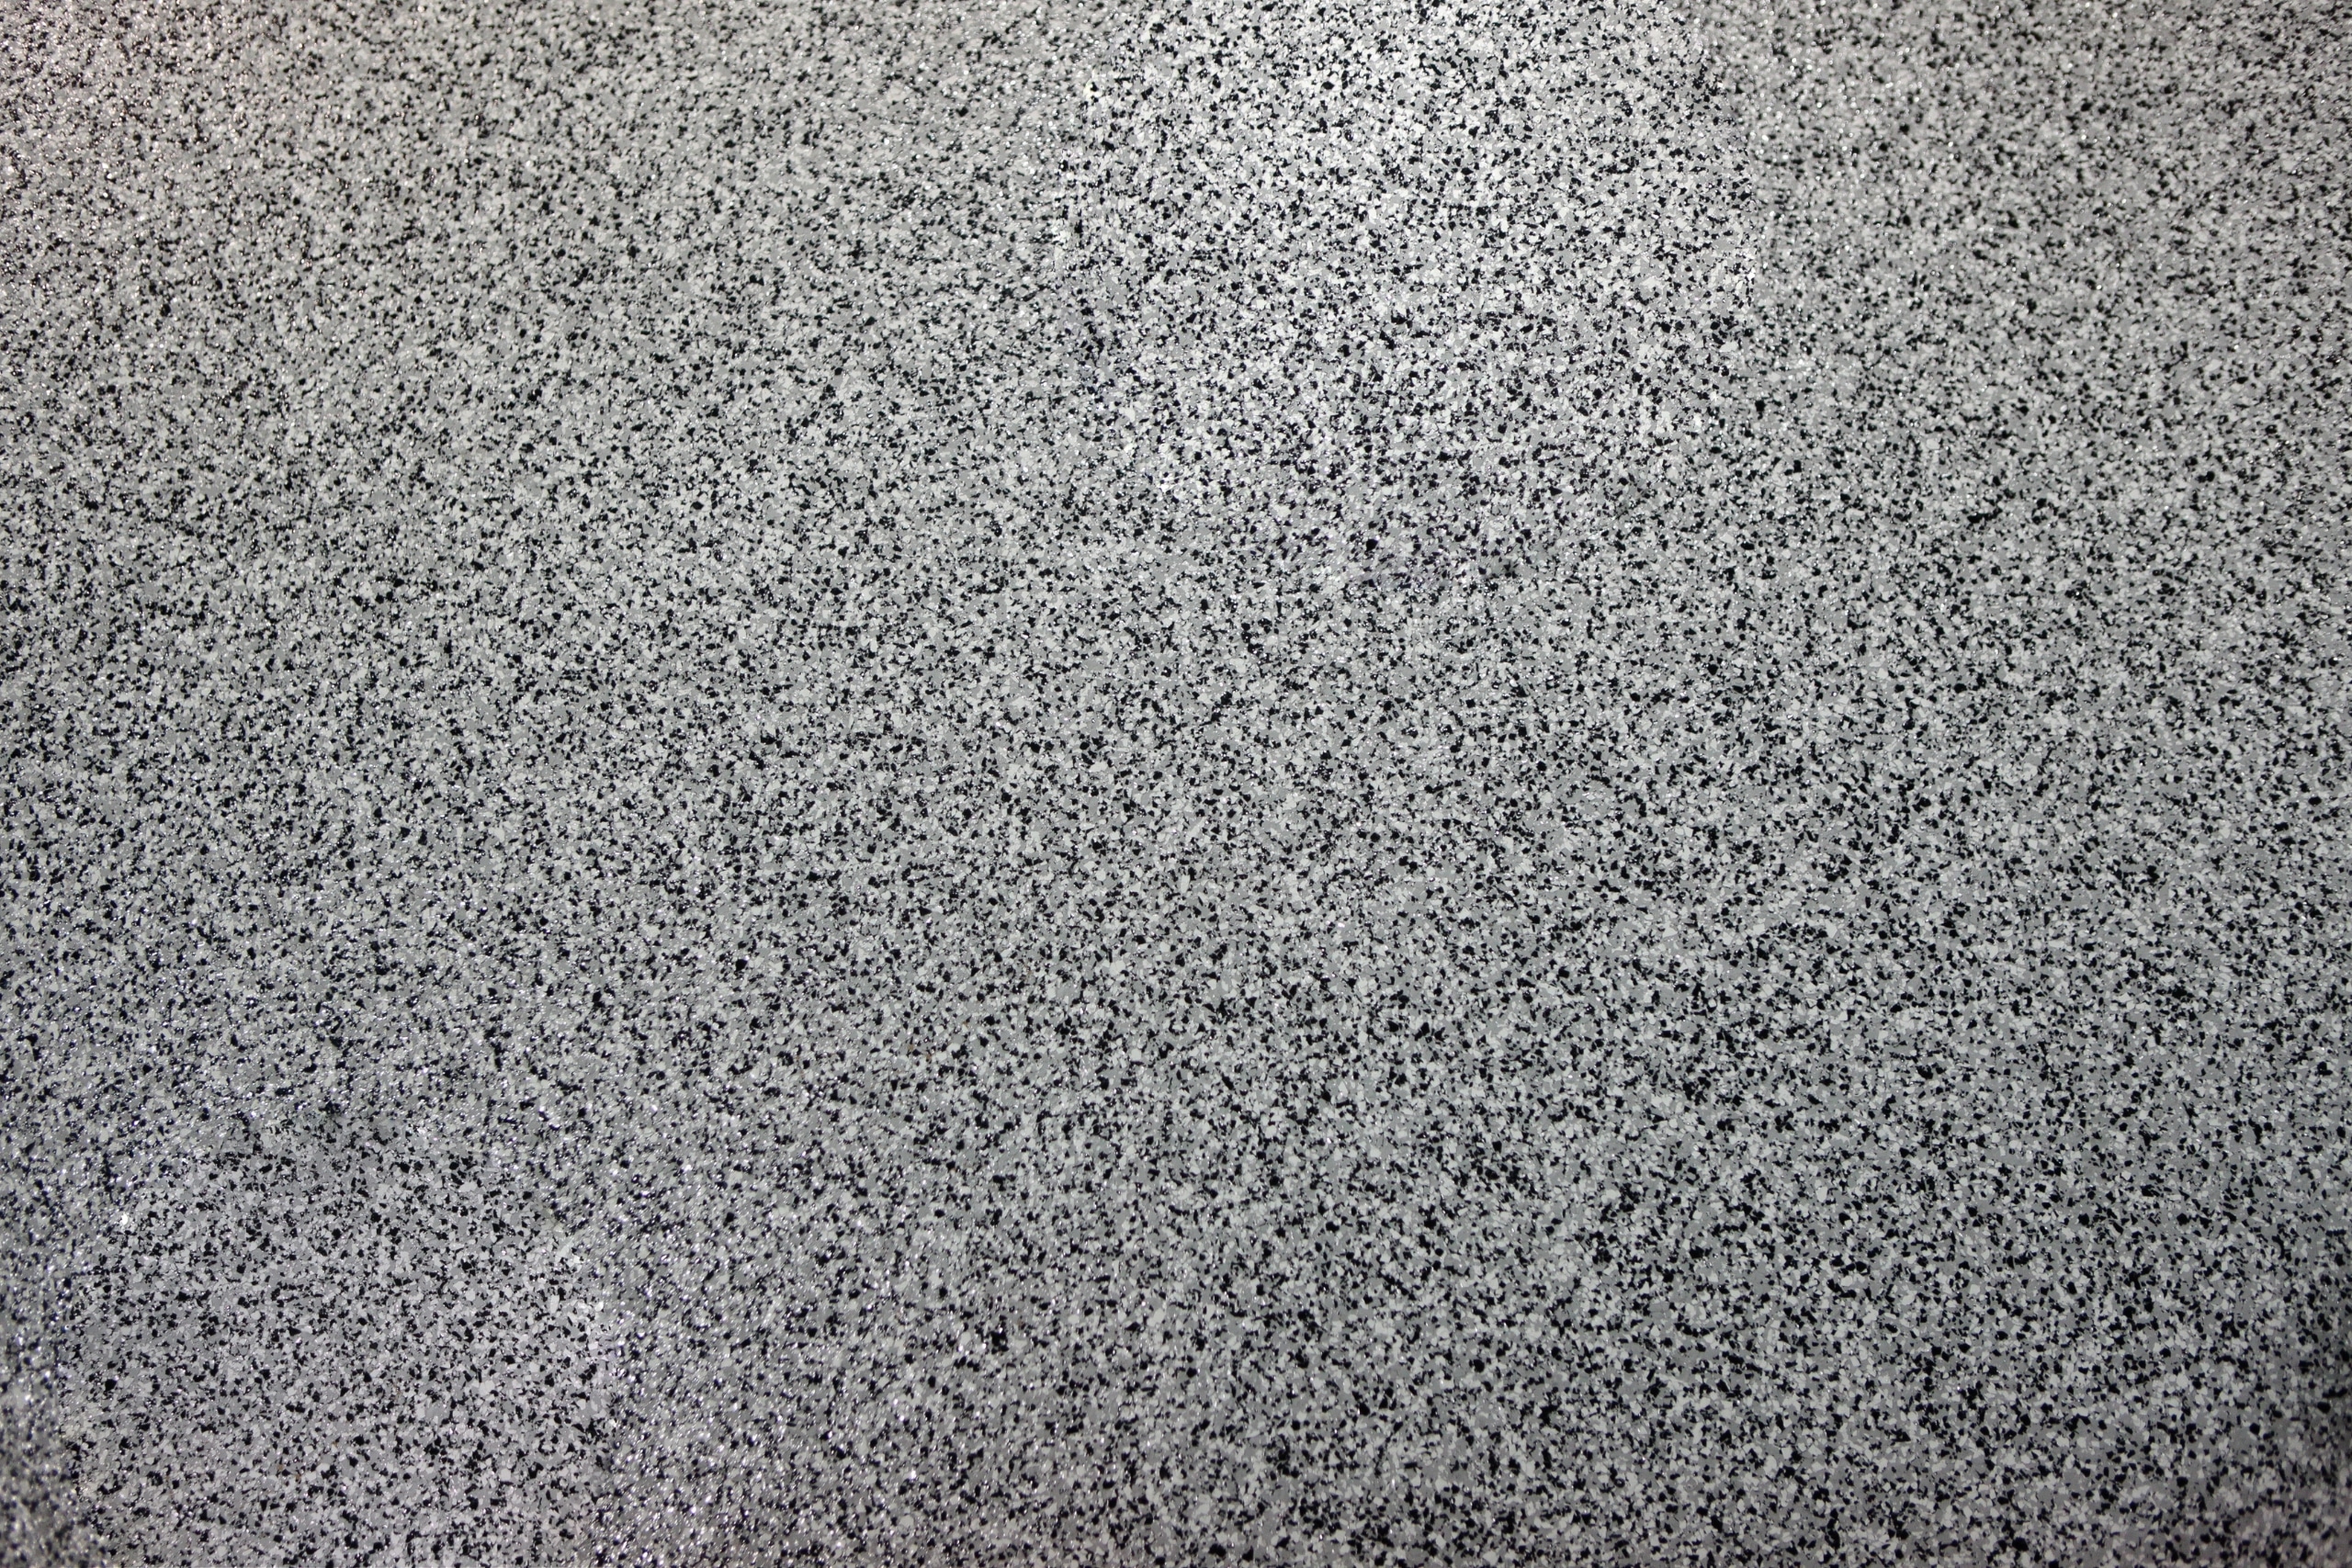 Polyaspartic Floor Coatings: Frequently Asked Questions